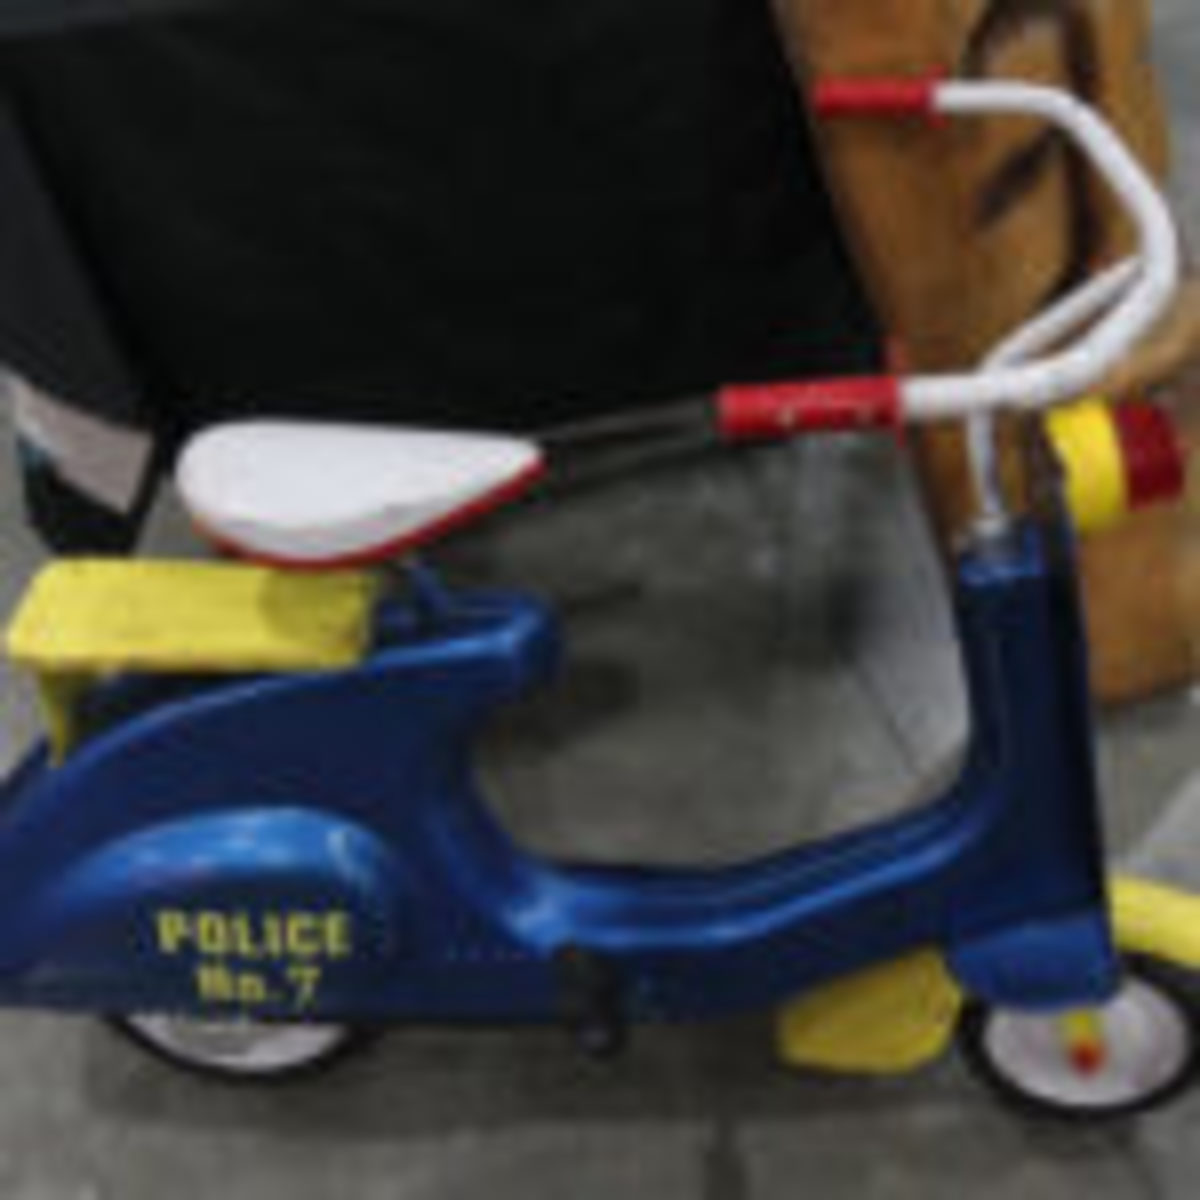 A hard to find Police pedal-car motorcycle was in the ZAPS booth.